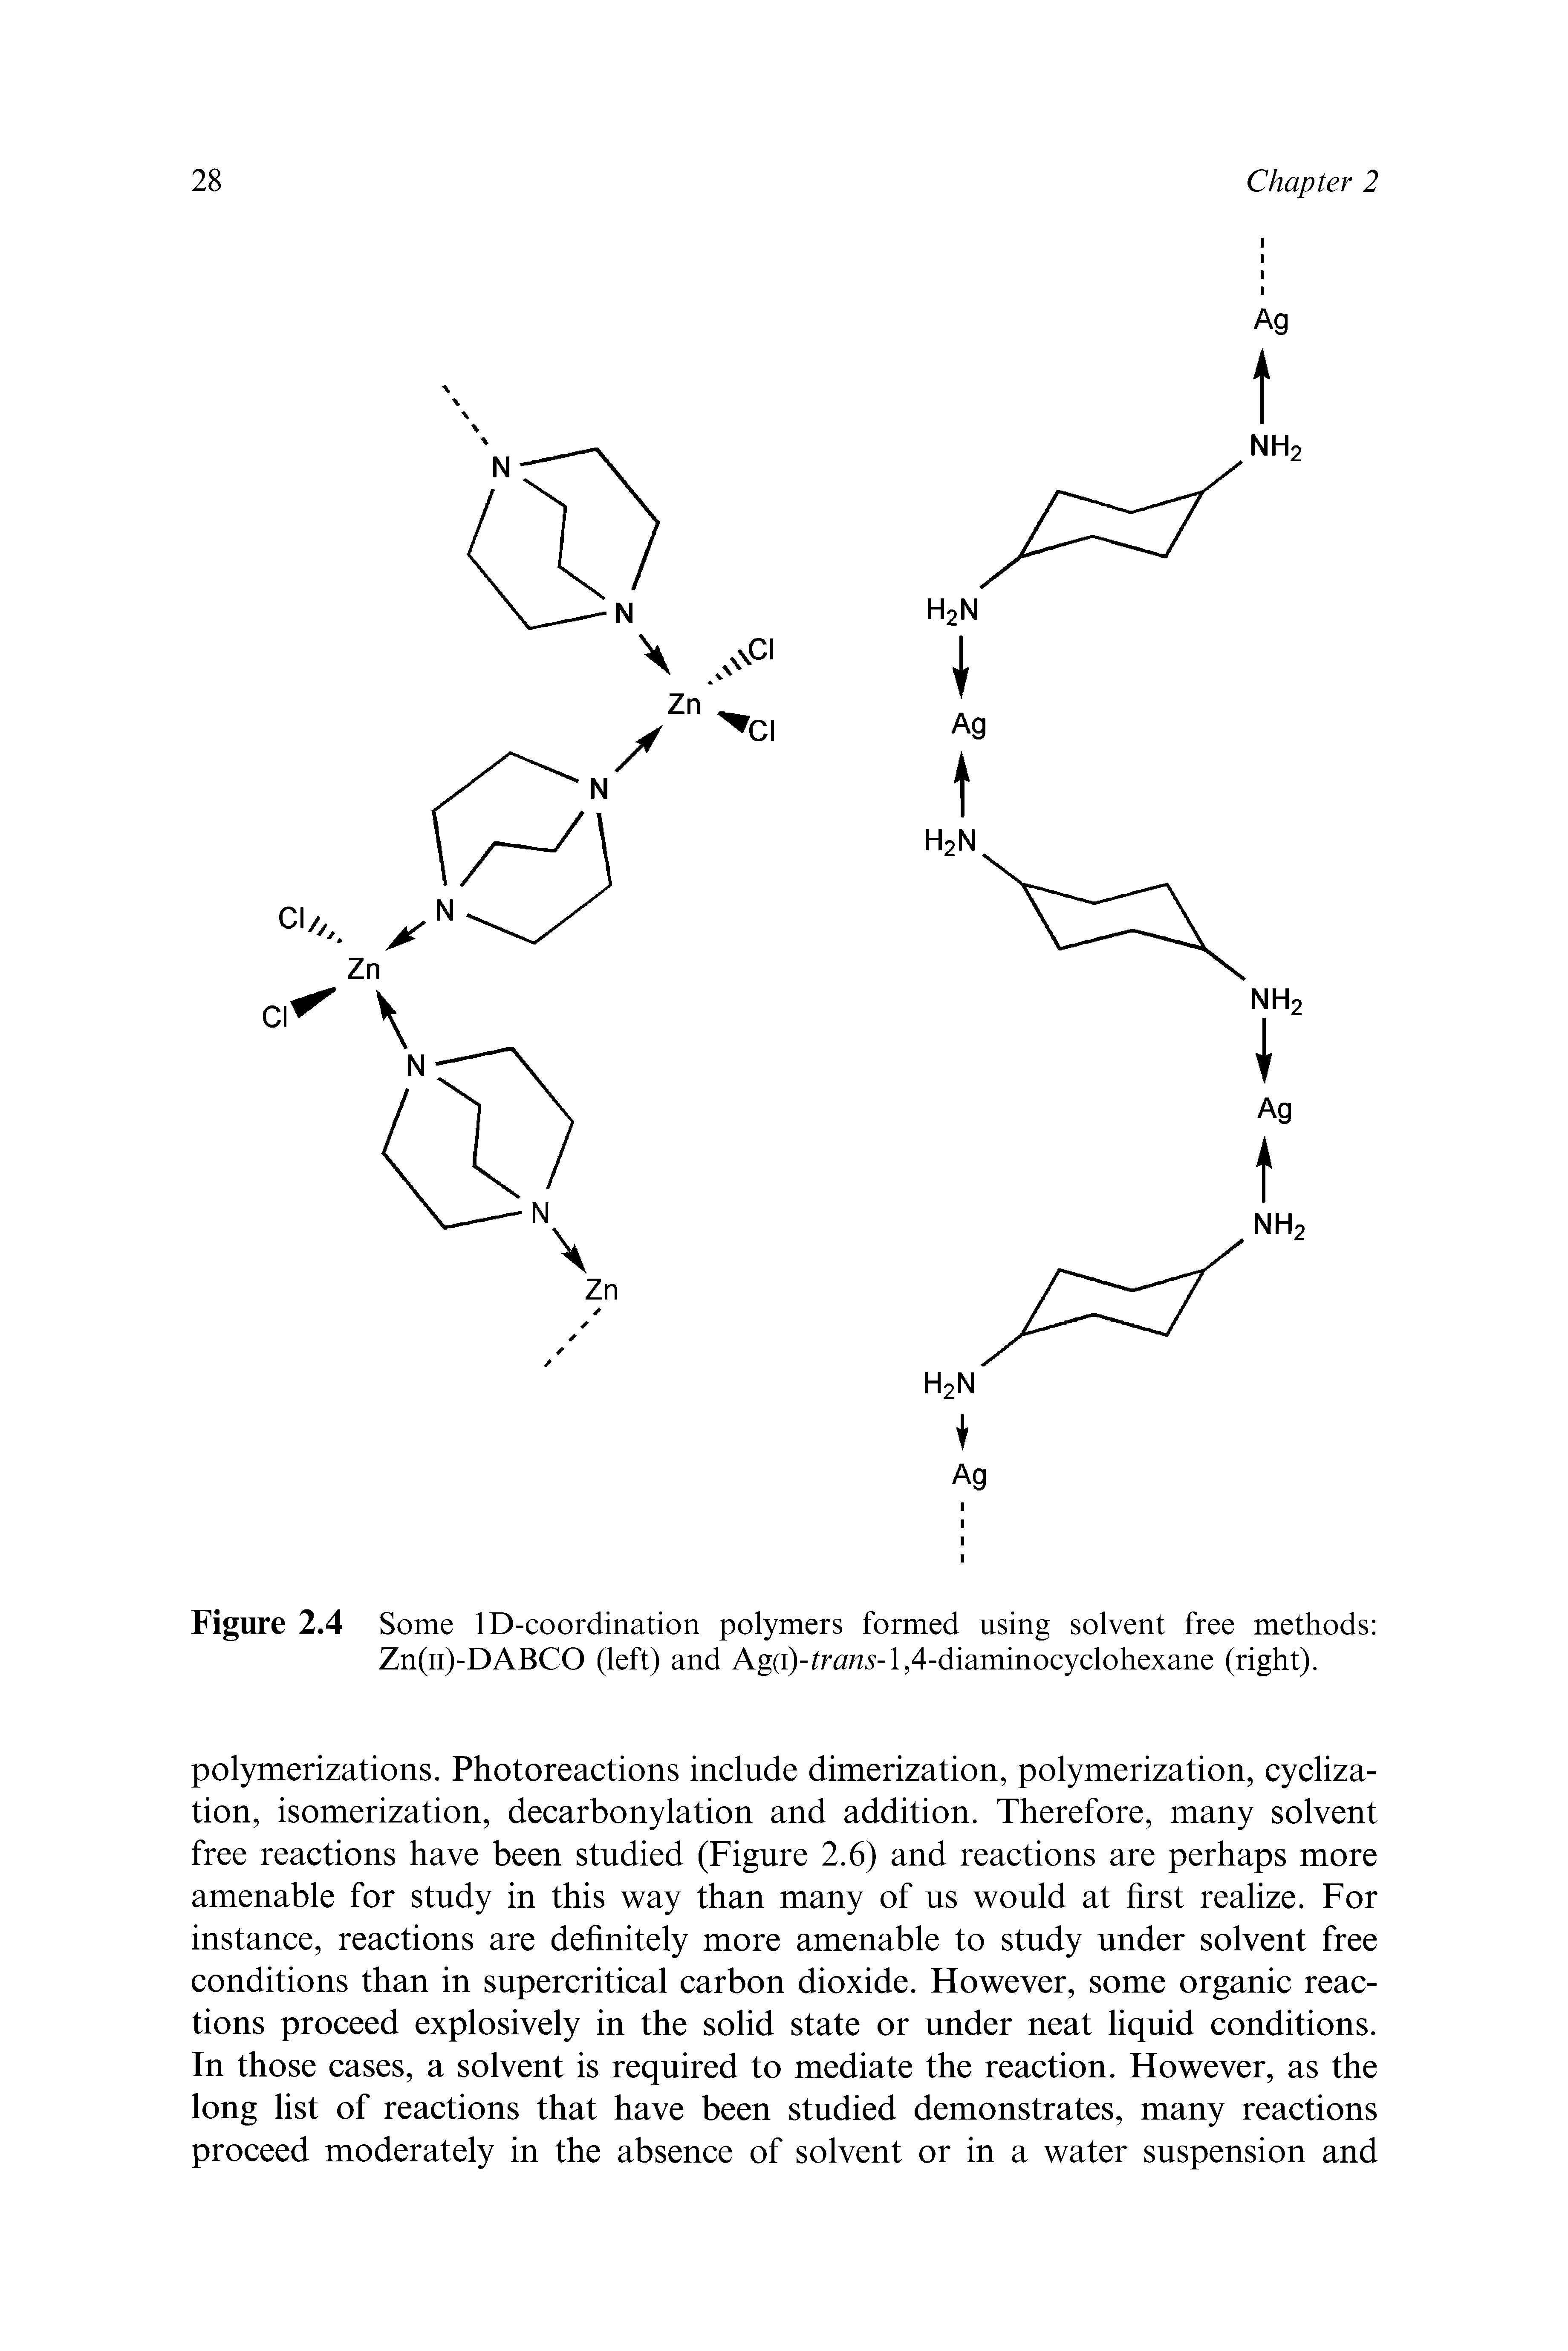 Figure 2.4 Some ID-coordination polymers formed using solvent free methods Zn(ii)-DABCO (left) and Ag(i)- r(2w -l,4-diaminocyclohexane (right).